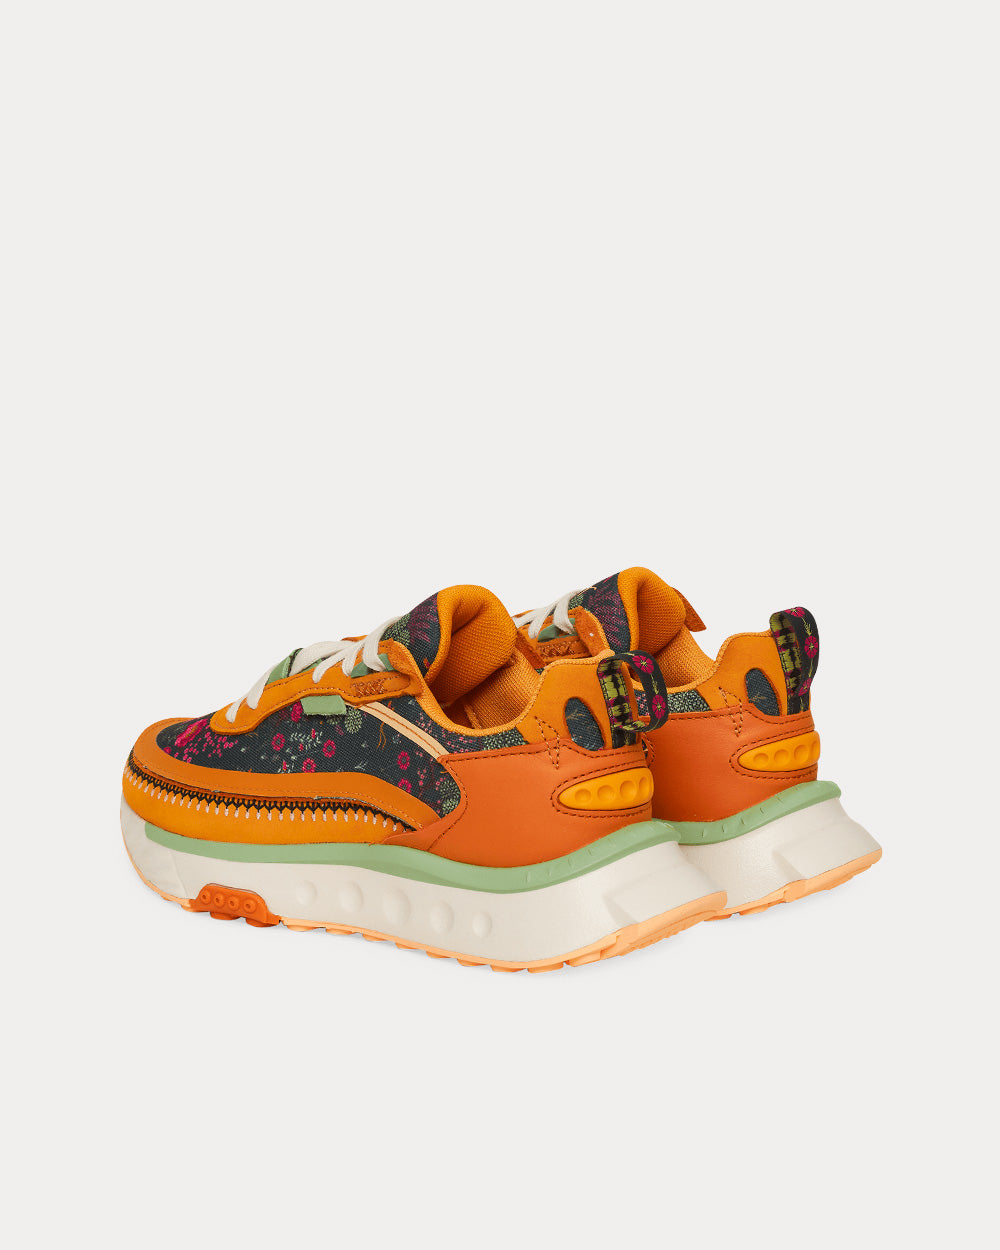 Puma x Liberty - Wild Rider Apricot Cream / Golden Nugget Low Top Sneakers